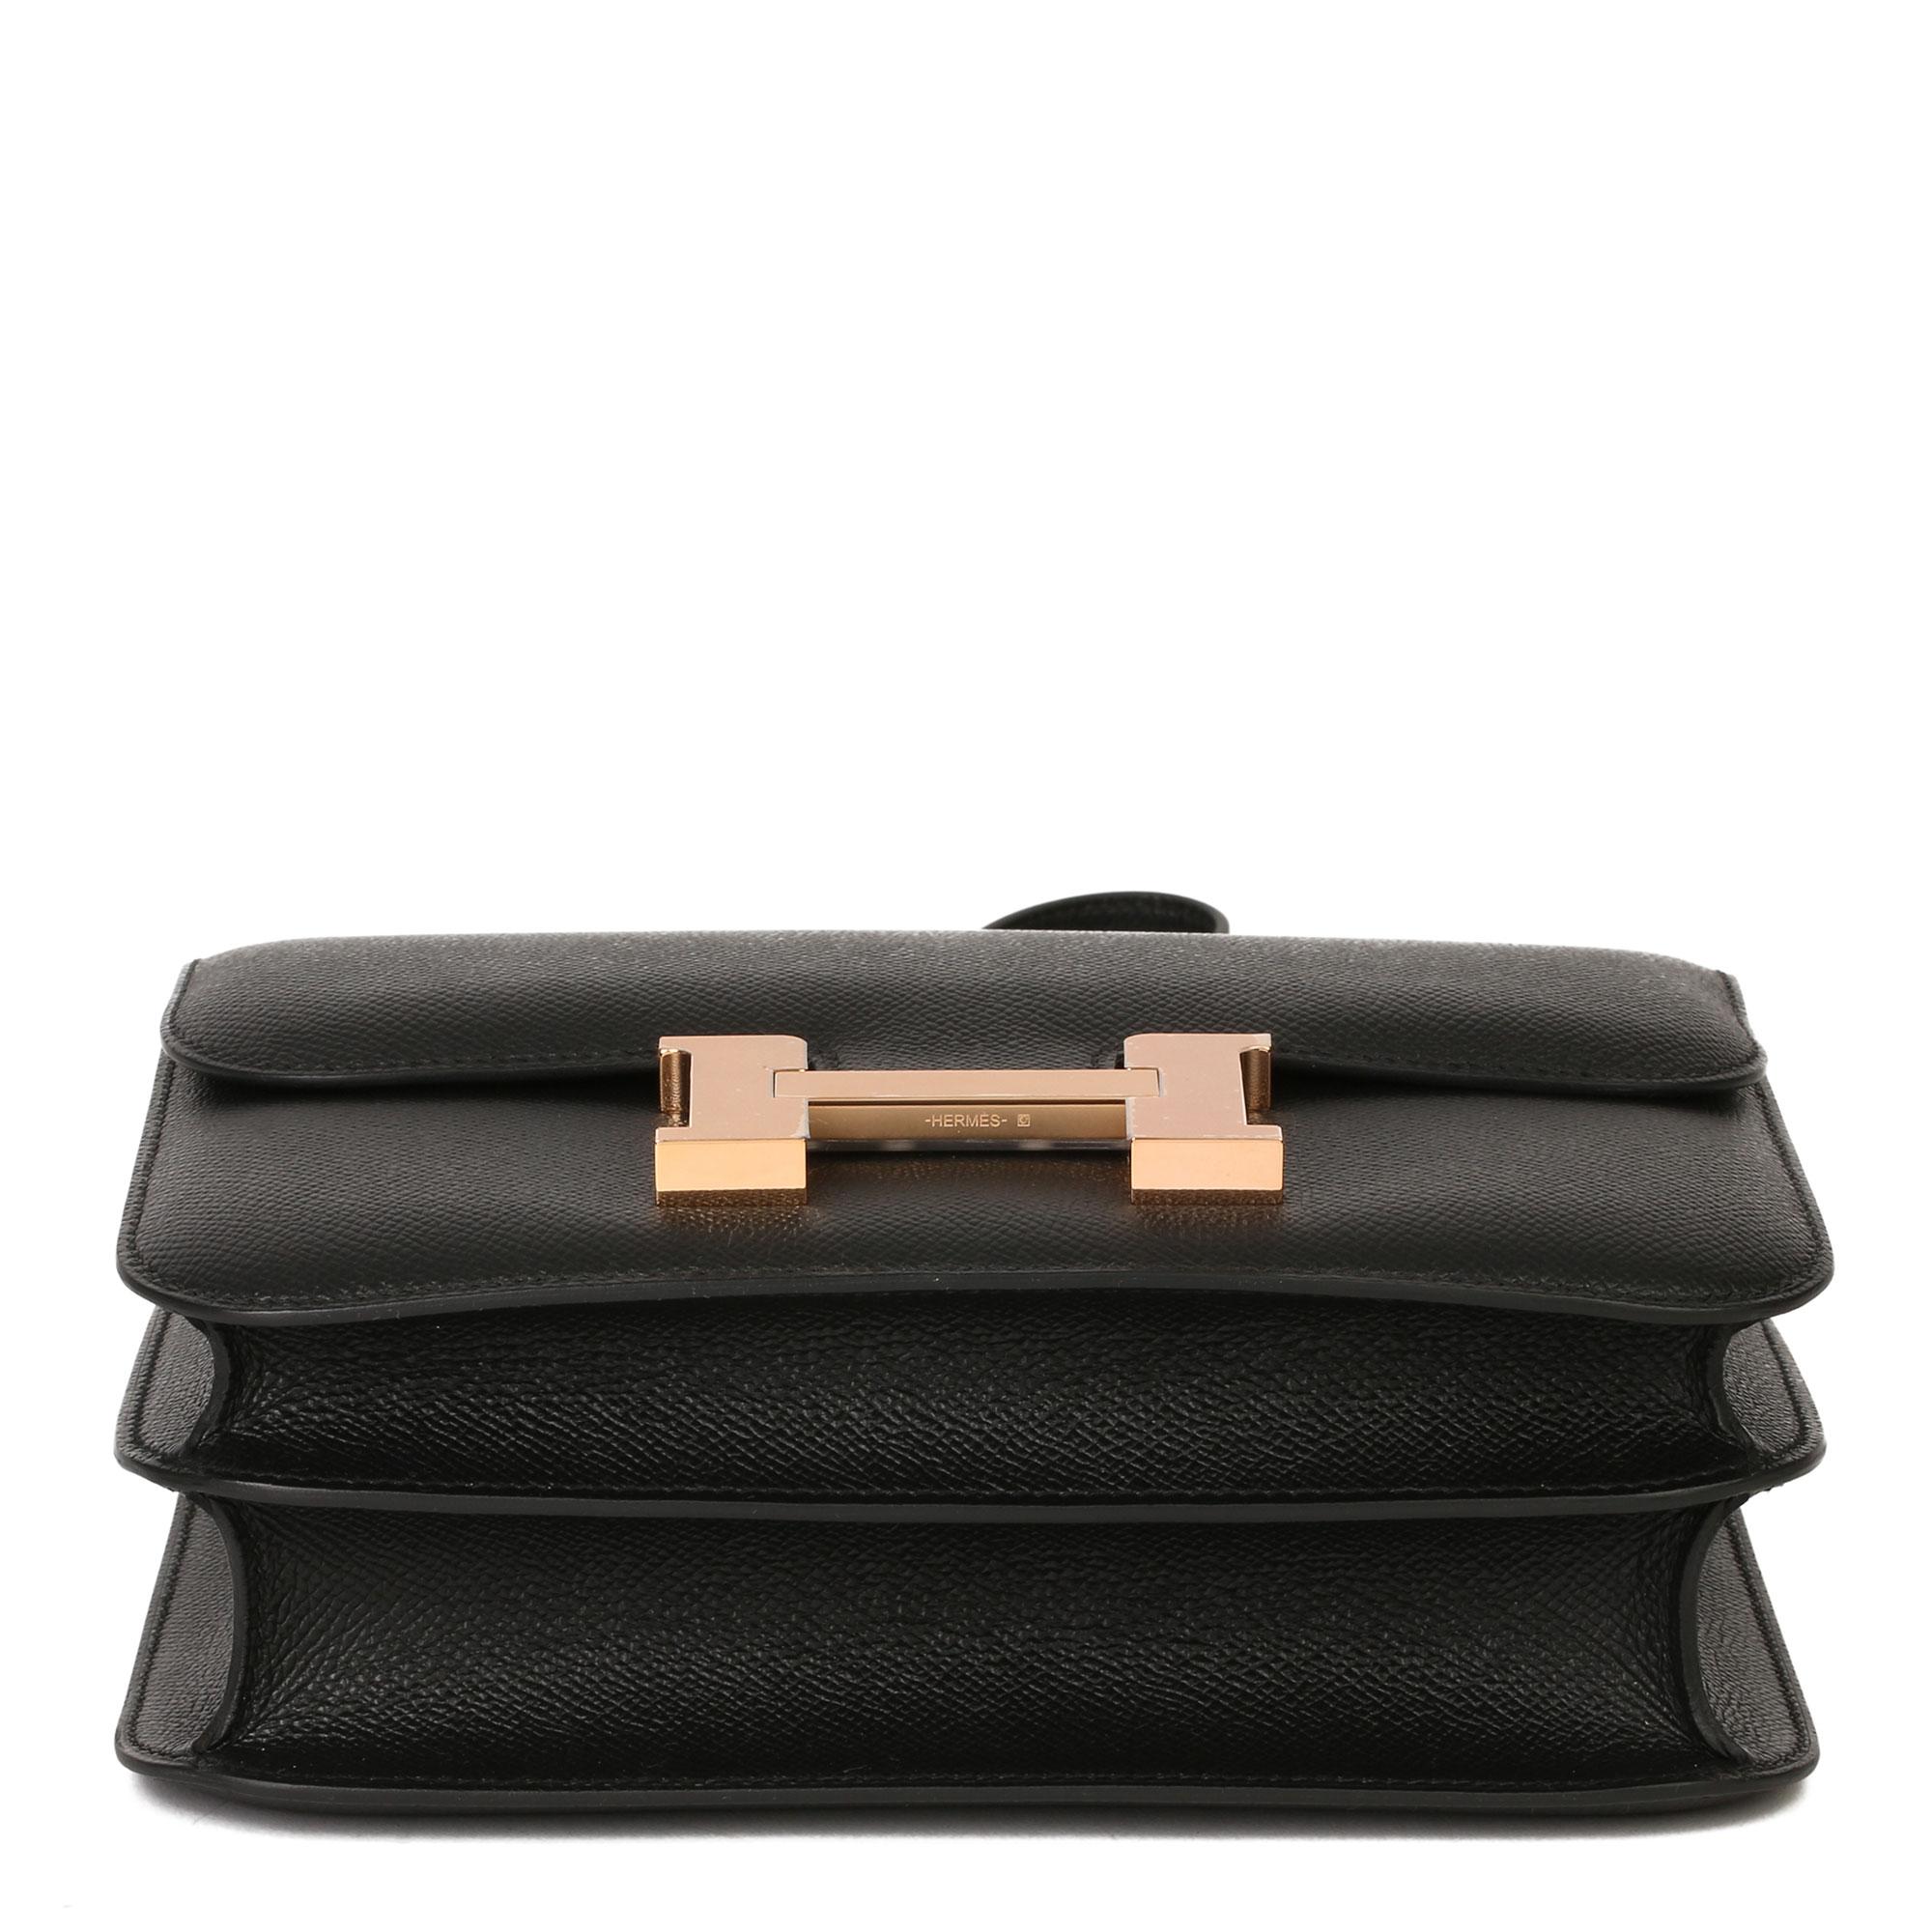 HERMÈS
Black Epsom Leather Constance 24

Xupes Reference: HBJJLG014
Serial Number: Y
Age (Circa): 2020
Accompanied By: Hermès Dust Bag, Box, Care Booklet, Receipt
Authenticity Details: Date Stamp (Made in France)
Gender: Ladies
Type: Shoulder,